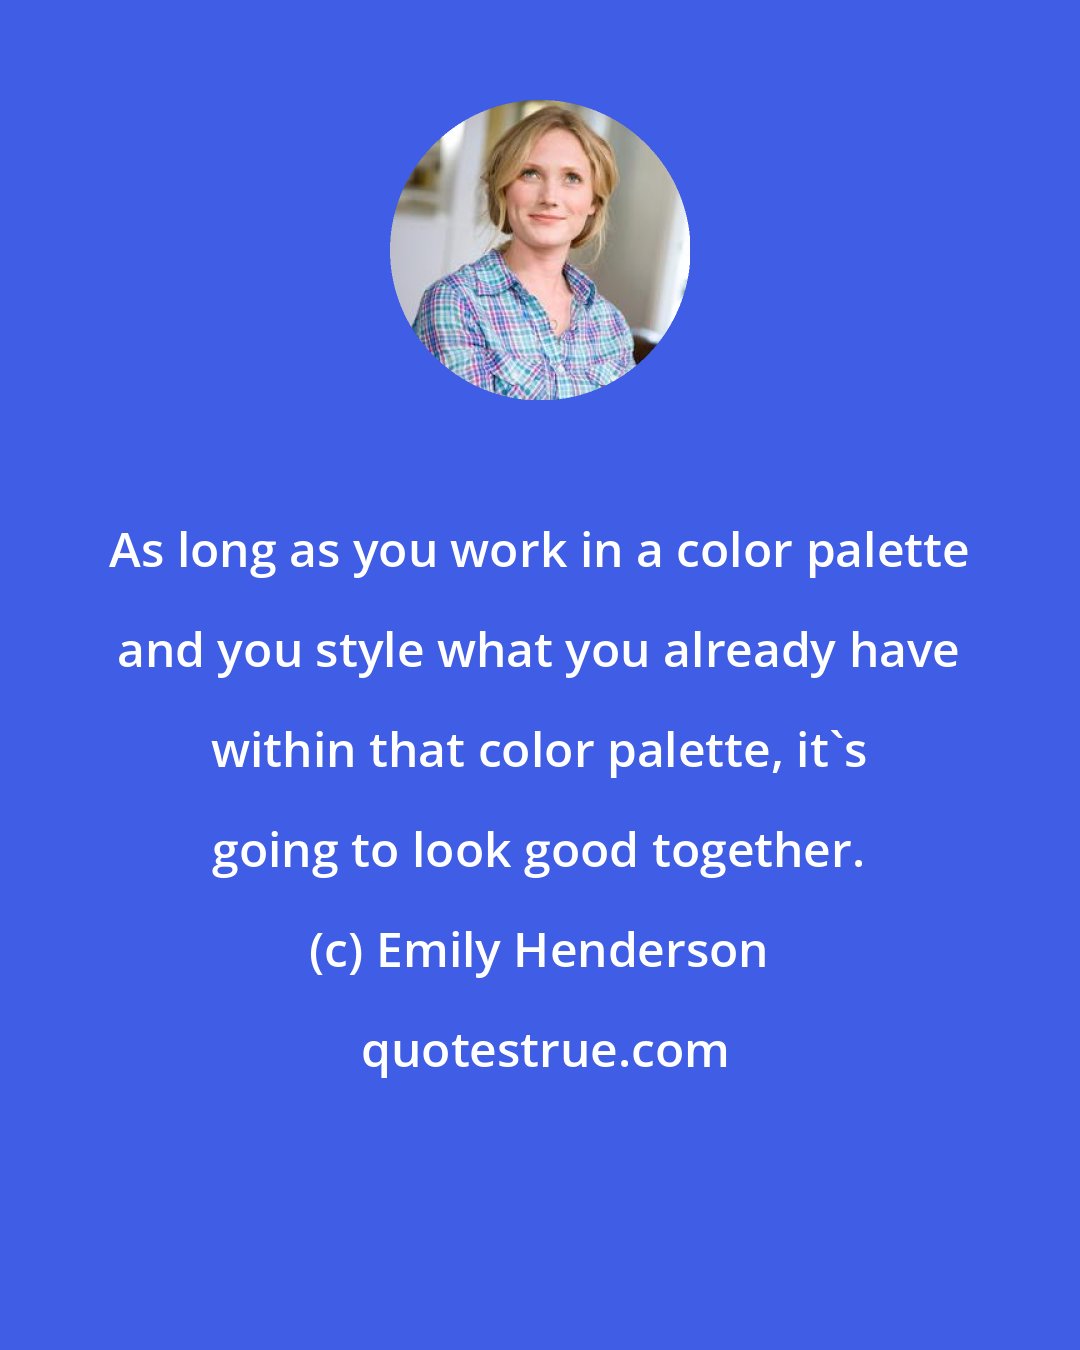 Emily Henderson: As long as you work in a color palette and you style what you already have within that color palette, it's going to look good together.